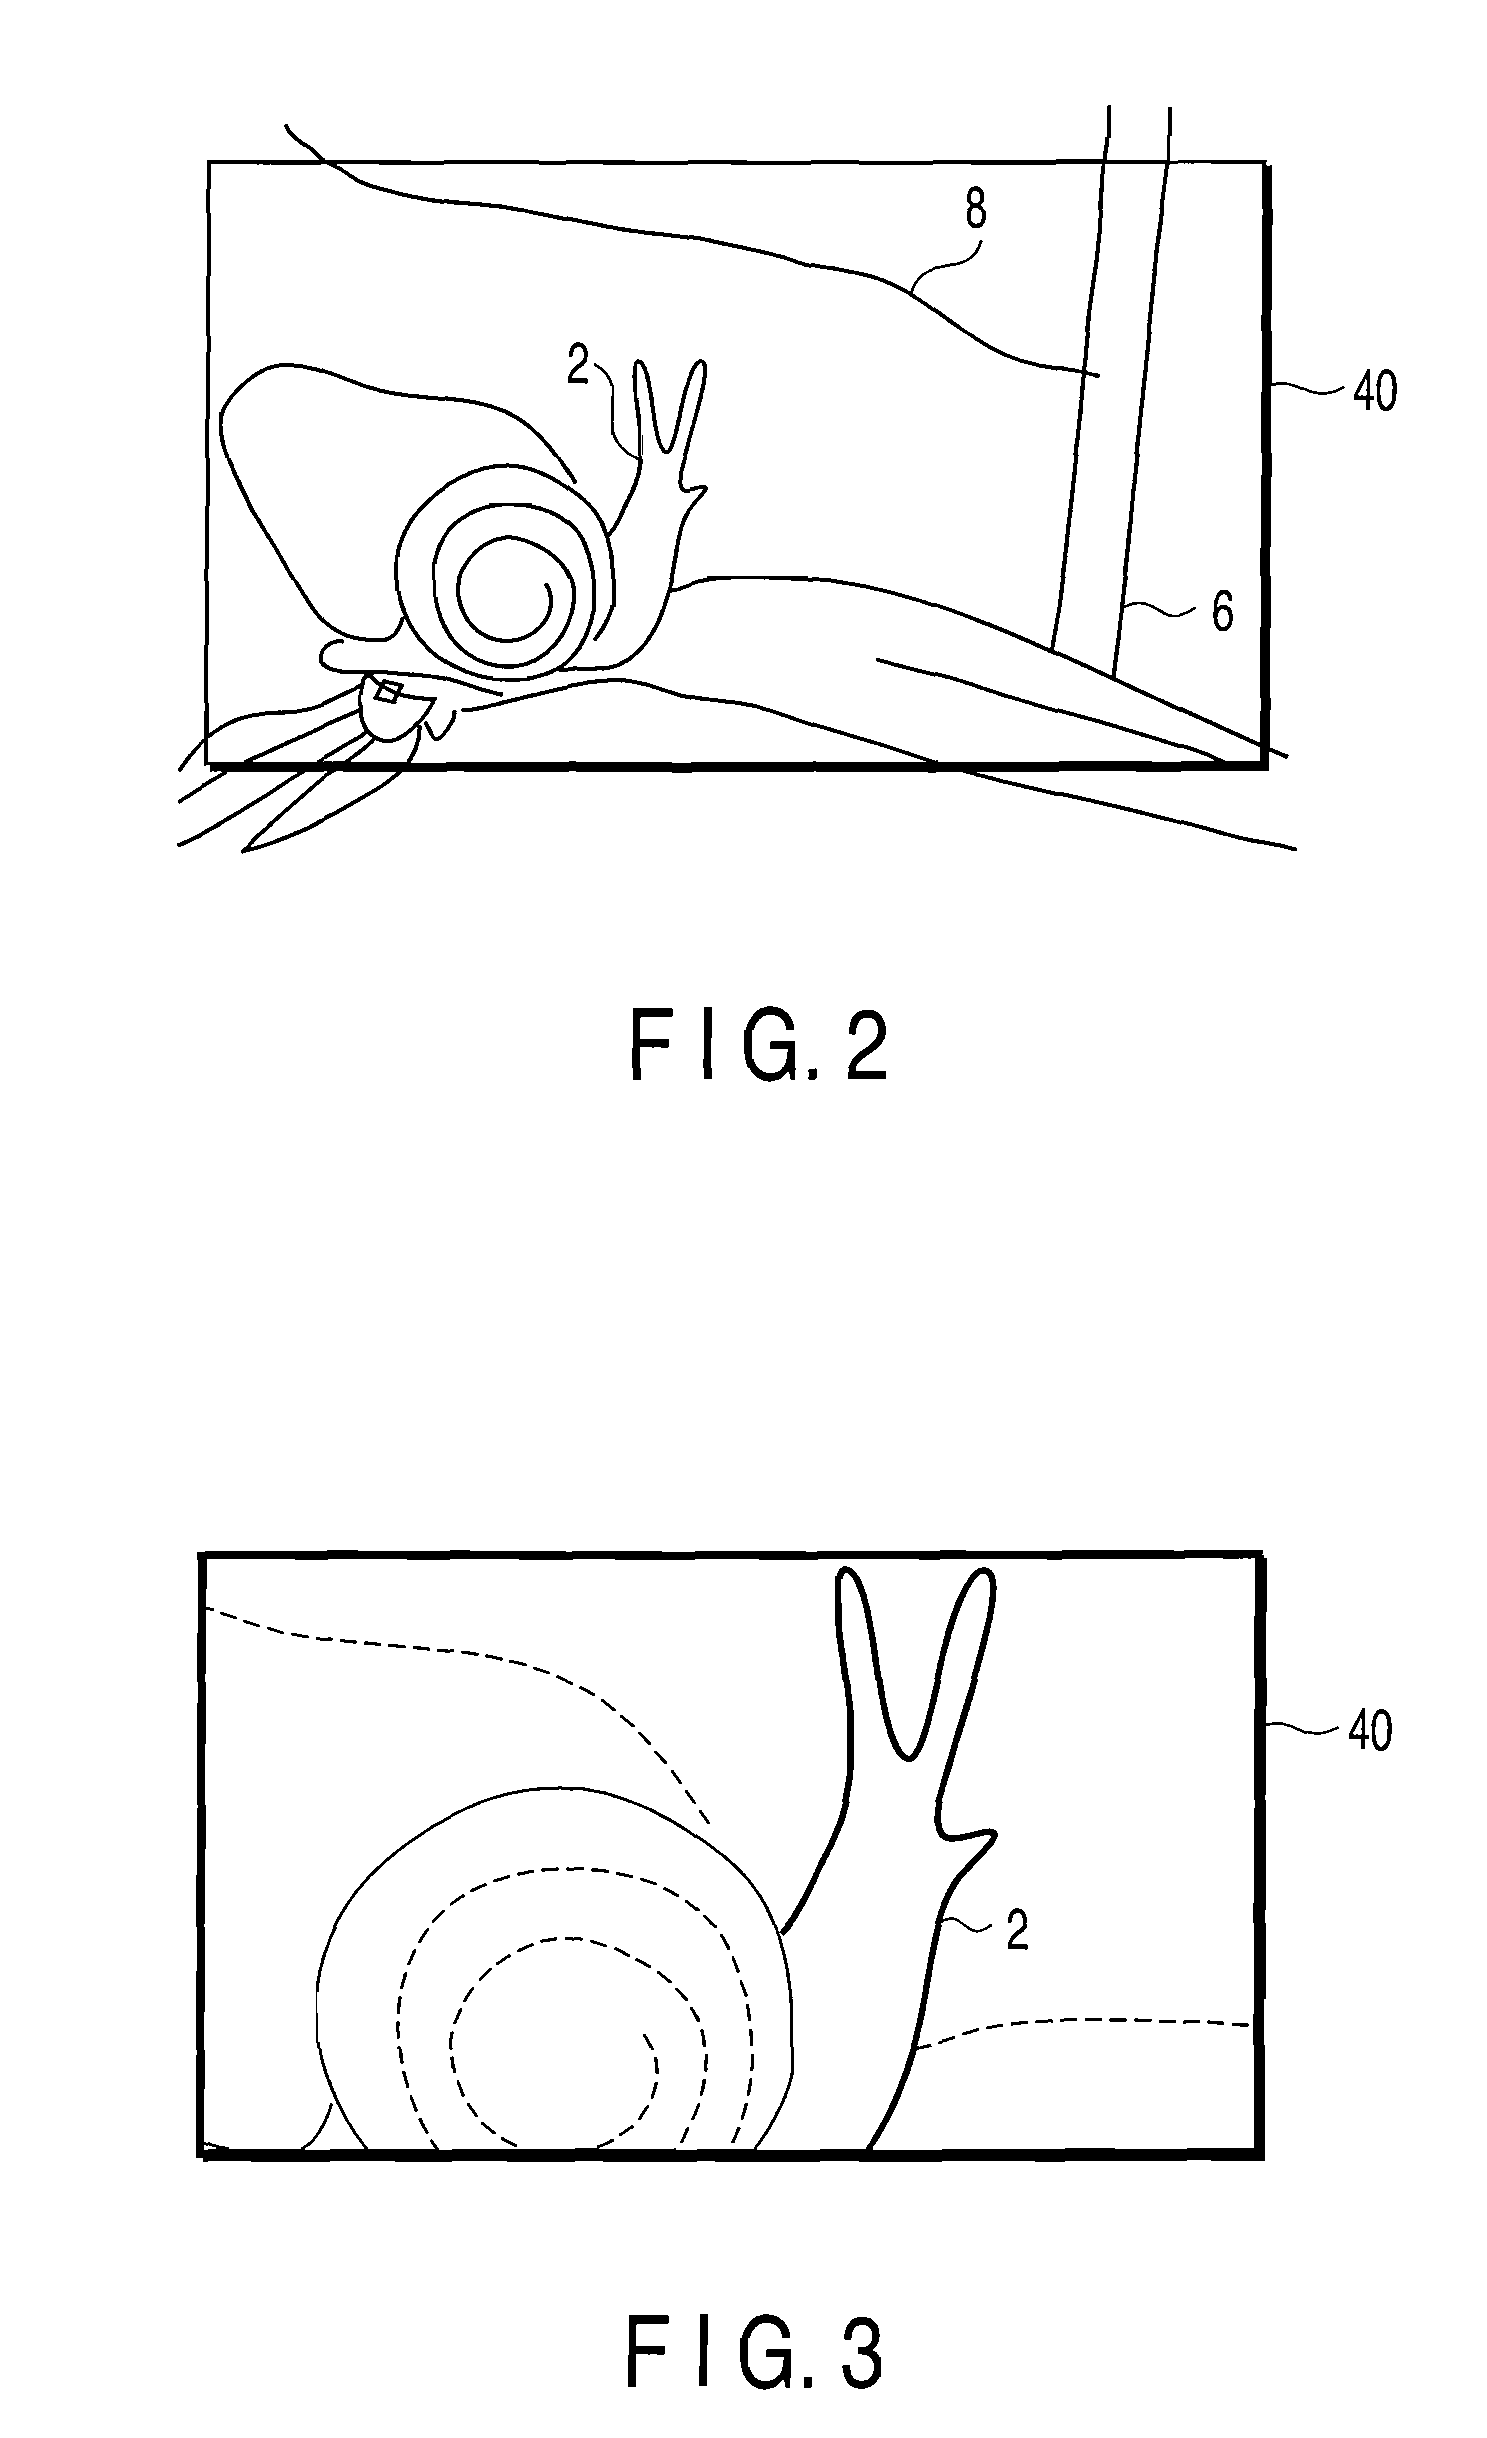 Imaging device